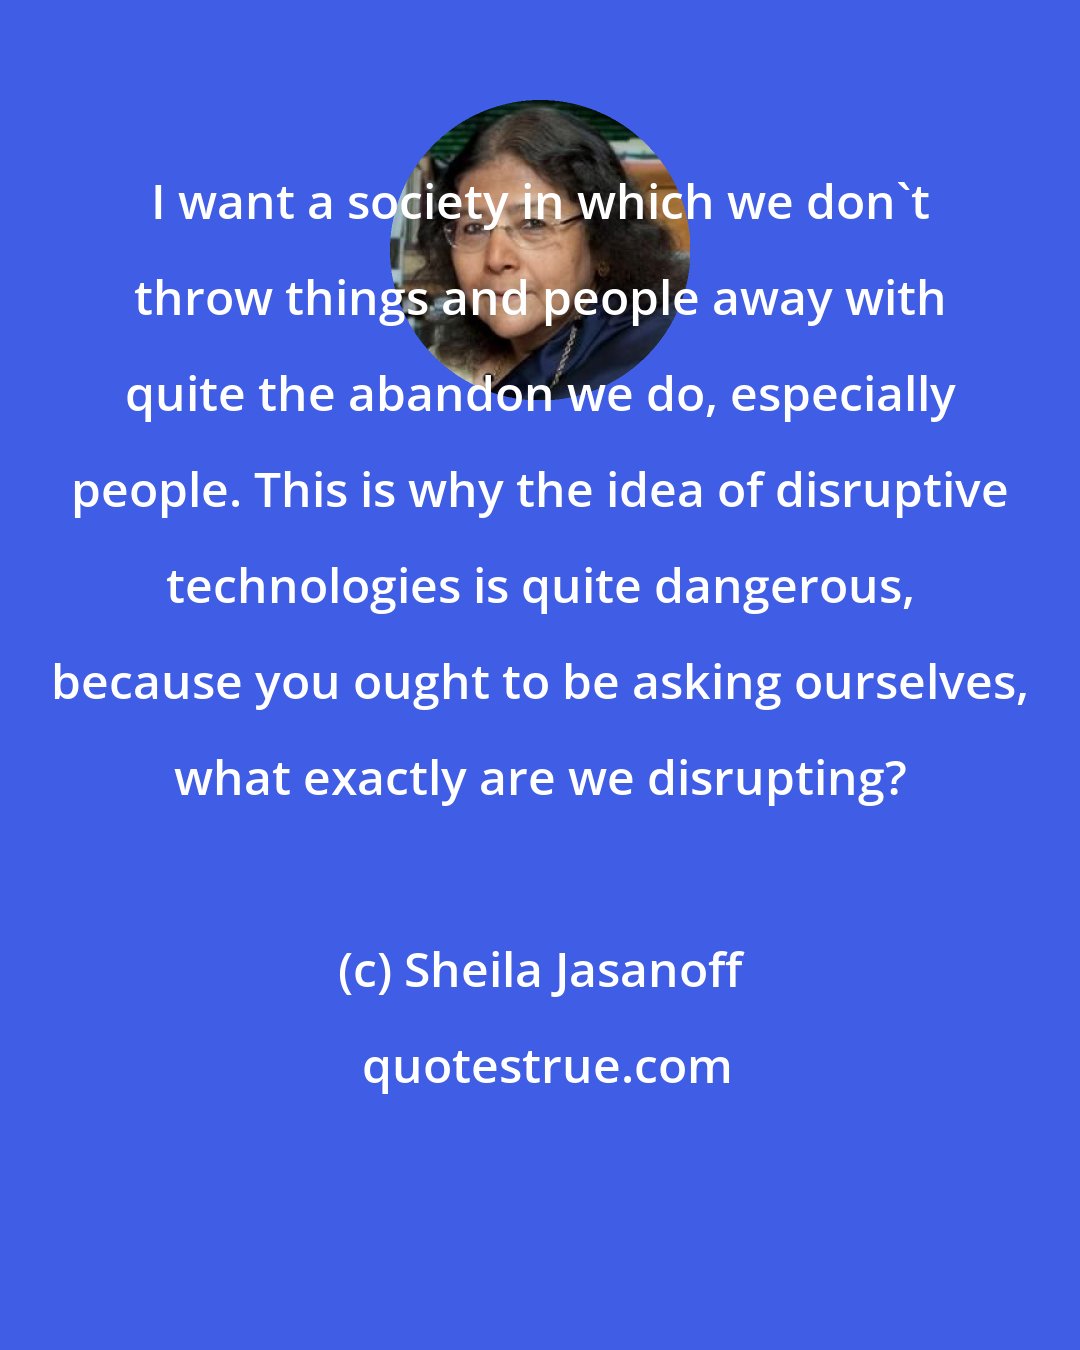 Sheila Jasanoff: I want a society in which we don't throw things and people away with quite the abandon we do, especially people. This is why the idea of disruptive technologies is quite dangerous, because you ought to be asking ourselves, what exactly are we disrupting?